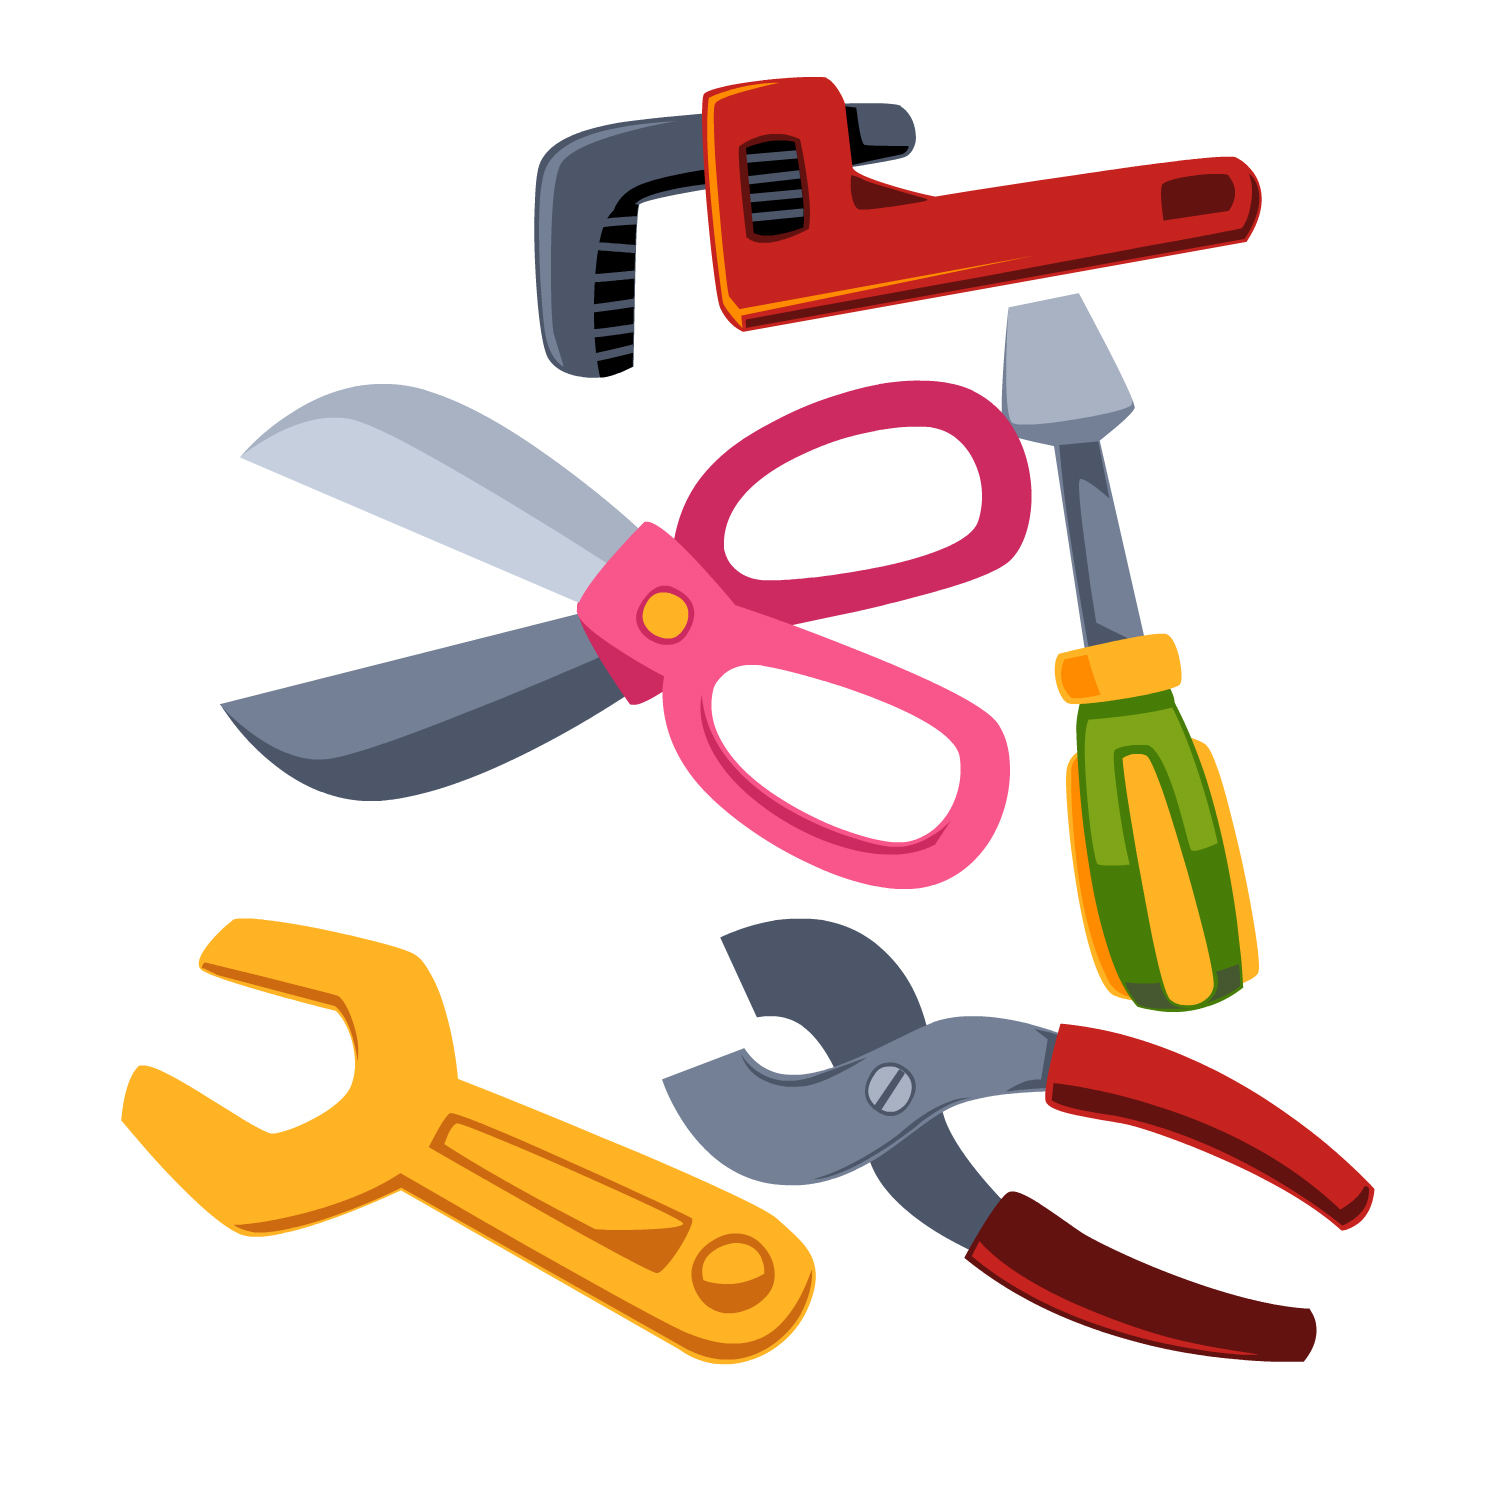 Sort by function (blow, cutting items)